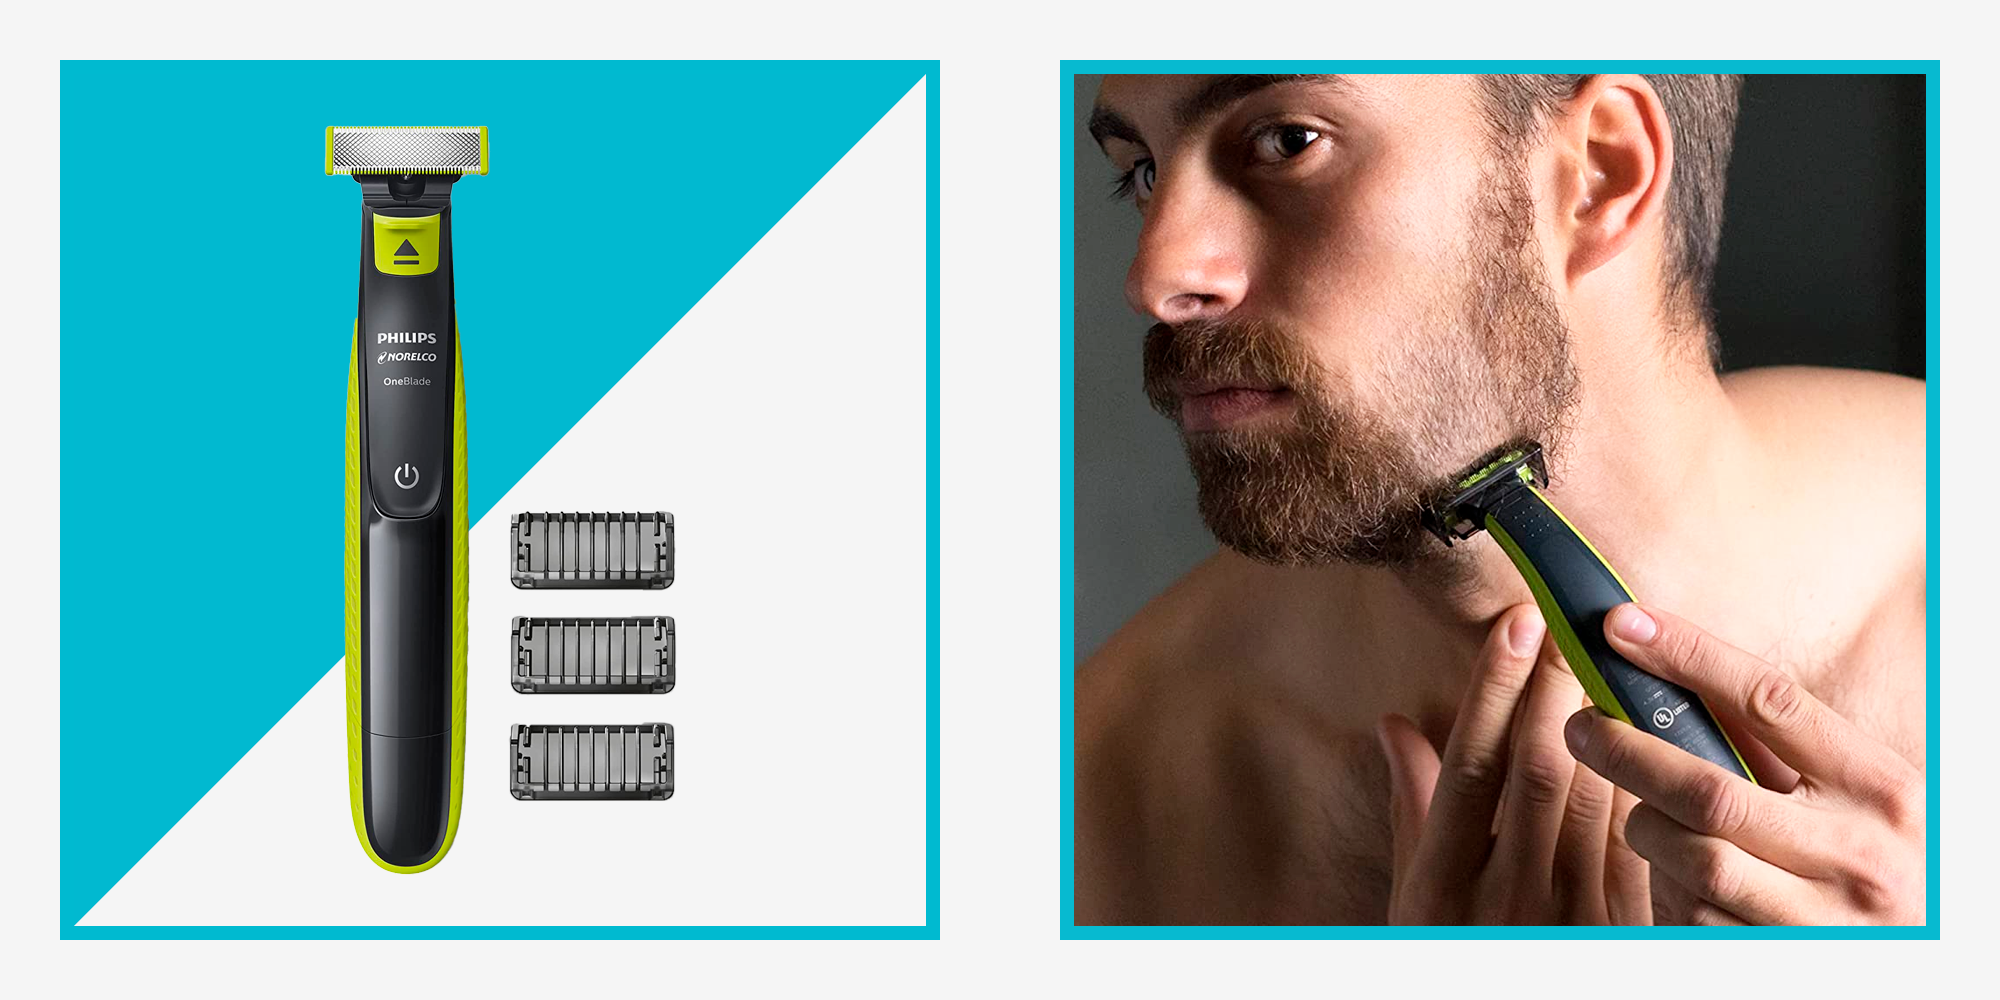 Philips One Blade Review: 5 Reasons Why This is The Best Grooming